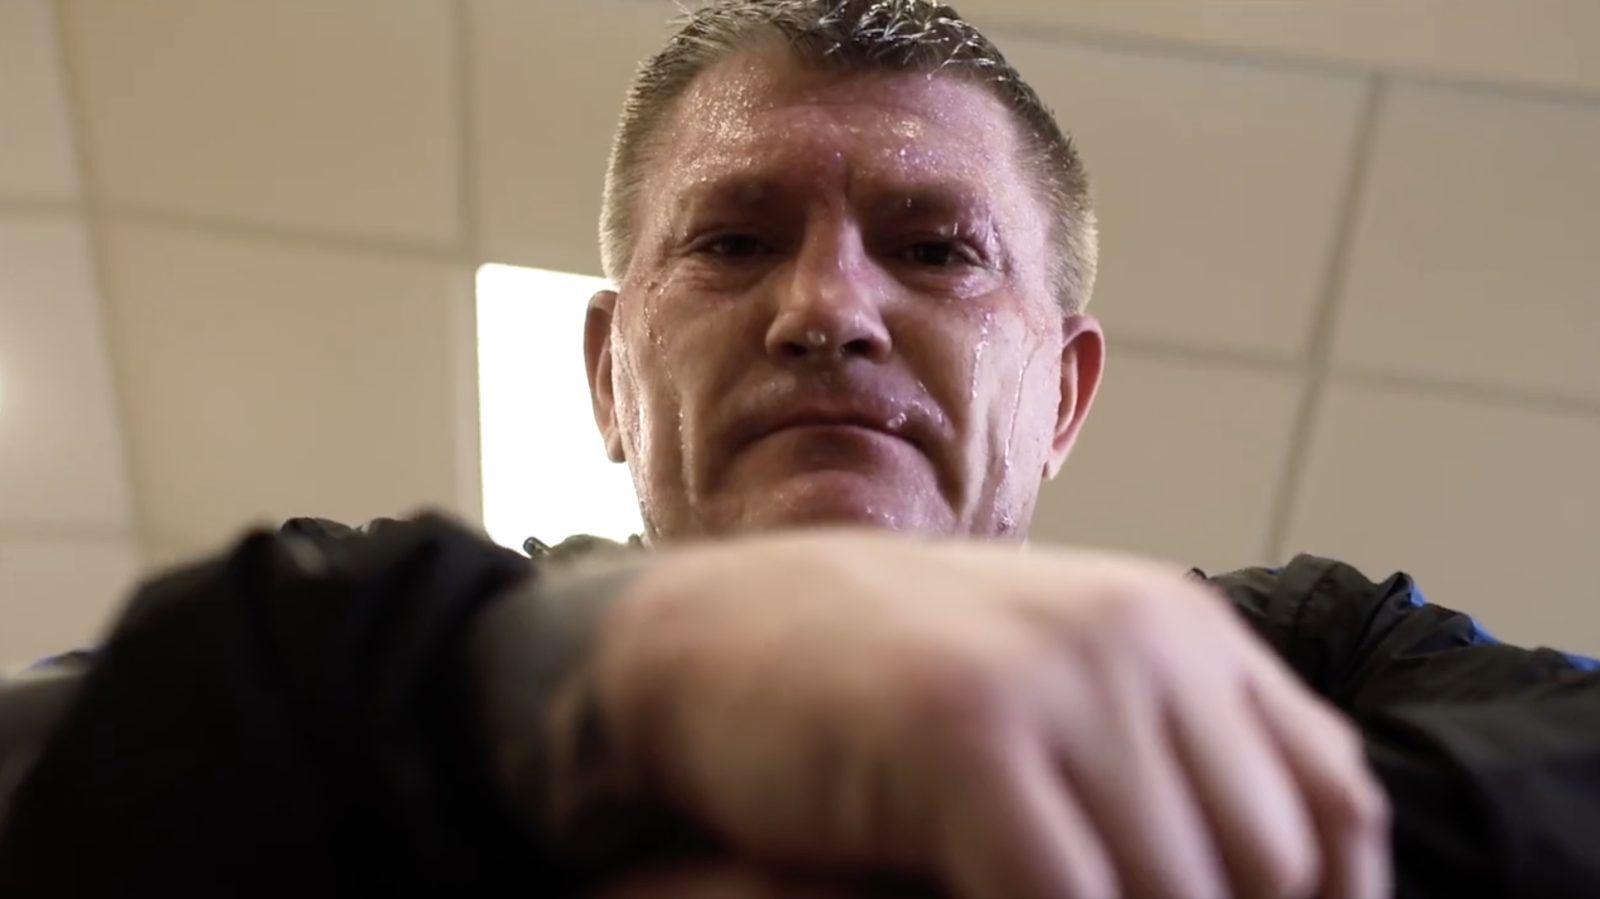 Ricky Hatton announces return to the boxing ring at 43 years old, The Manc